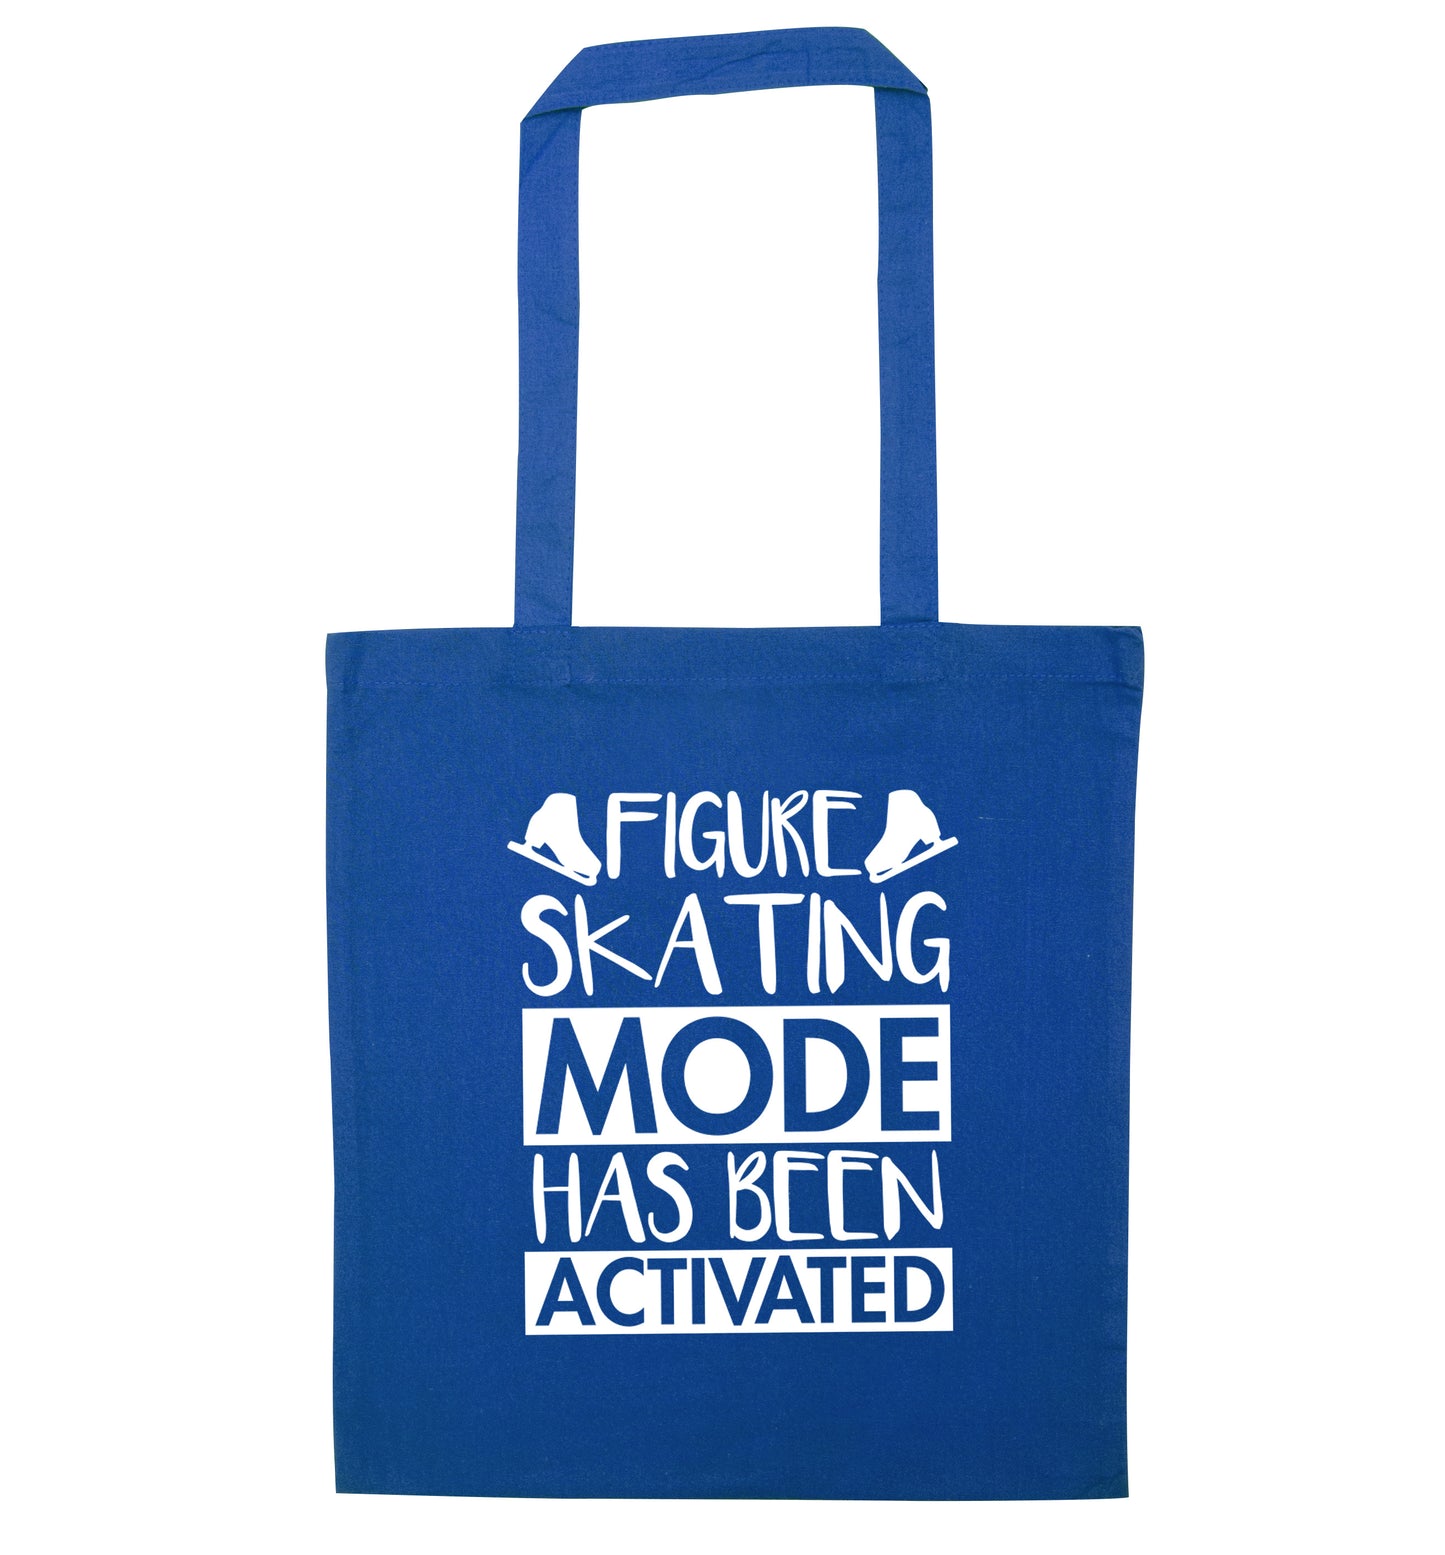 Figure skating mode activated blue tote bag